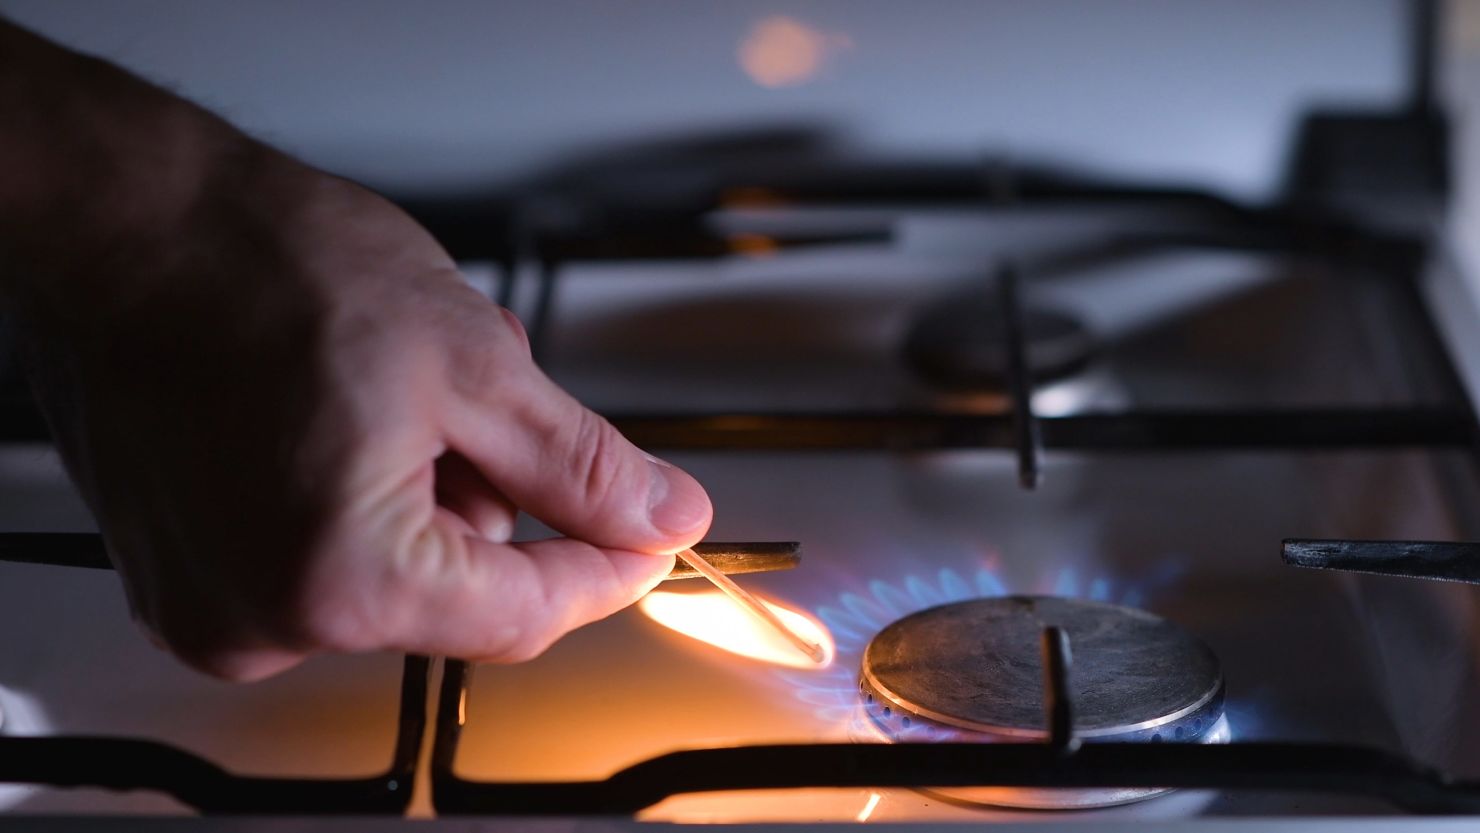 More than 400 Americans die each year from carbon monoxide poisoning, many because they've tried do-it-yourself fixes during power outages, according to the CDC.